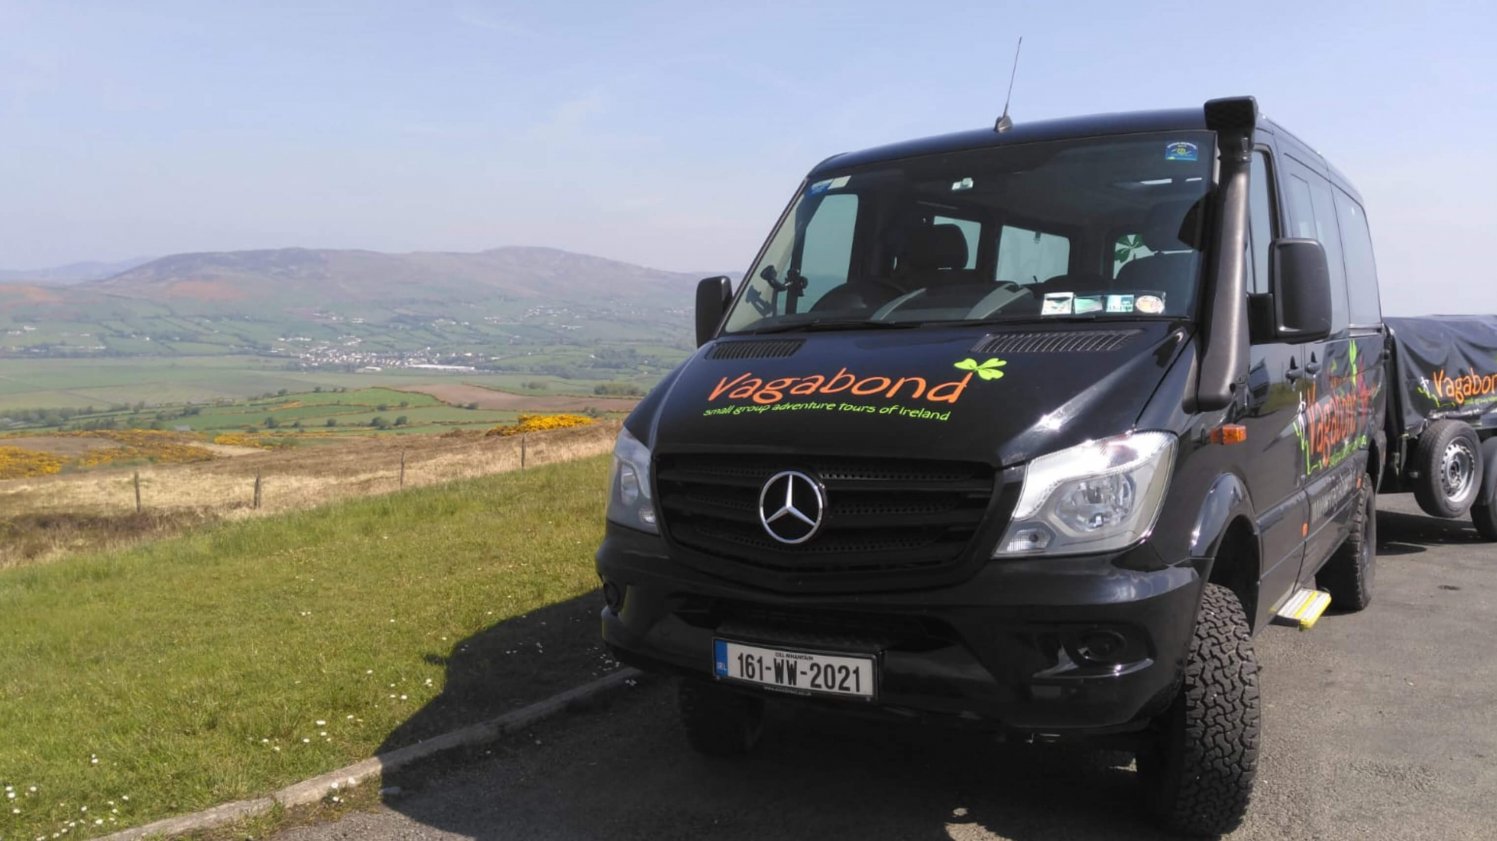 A 4x4 VagaTron touring vehicle parked up with blue skies and a lovely Irish landscape in the background